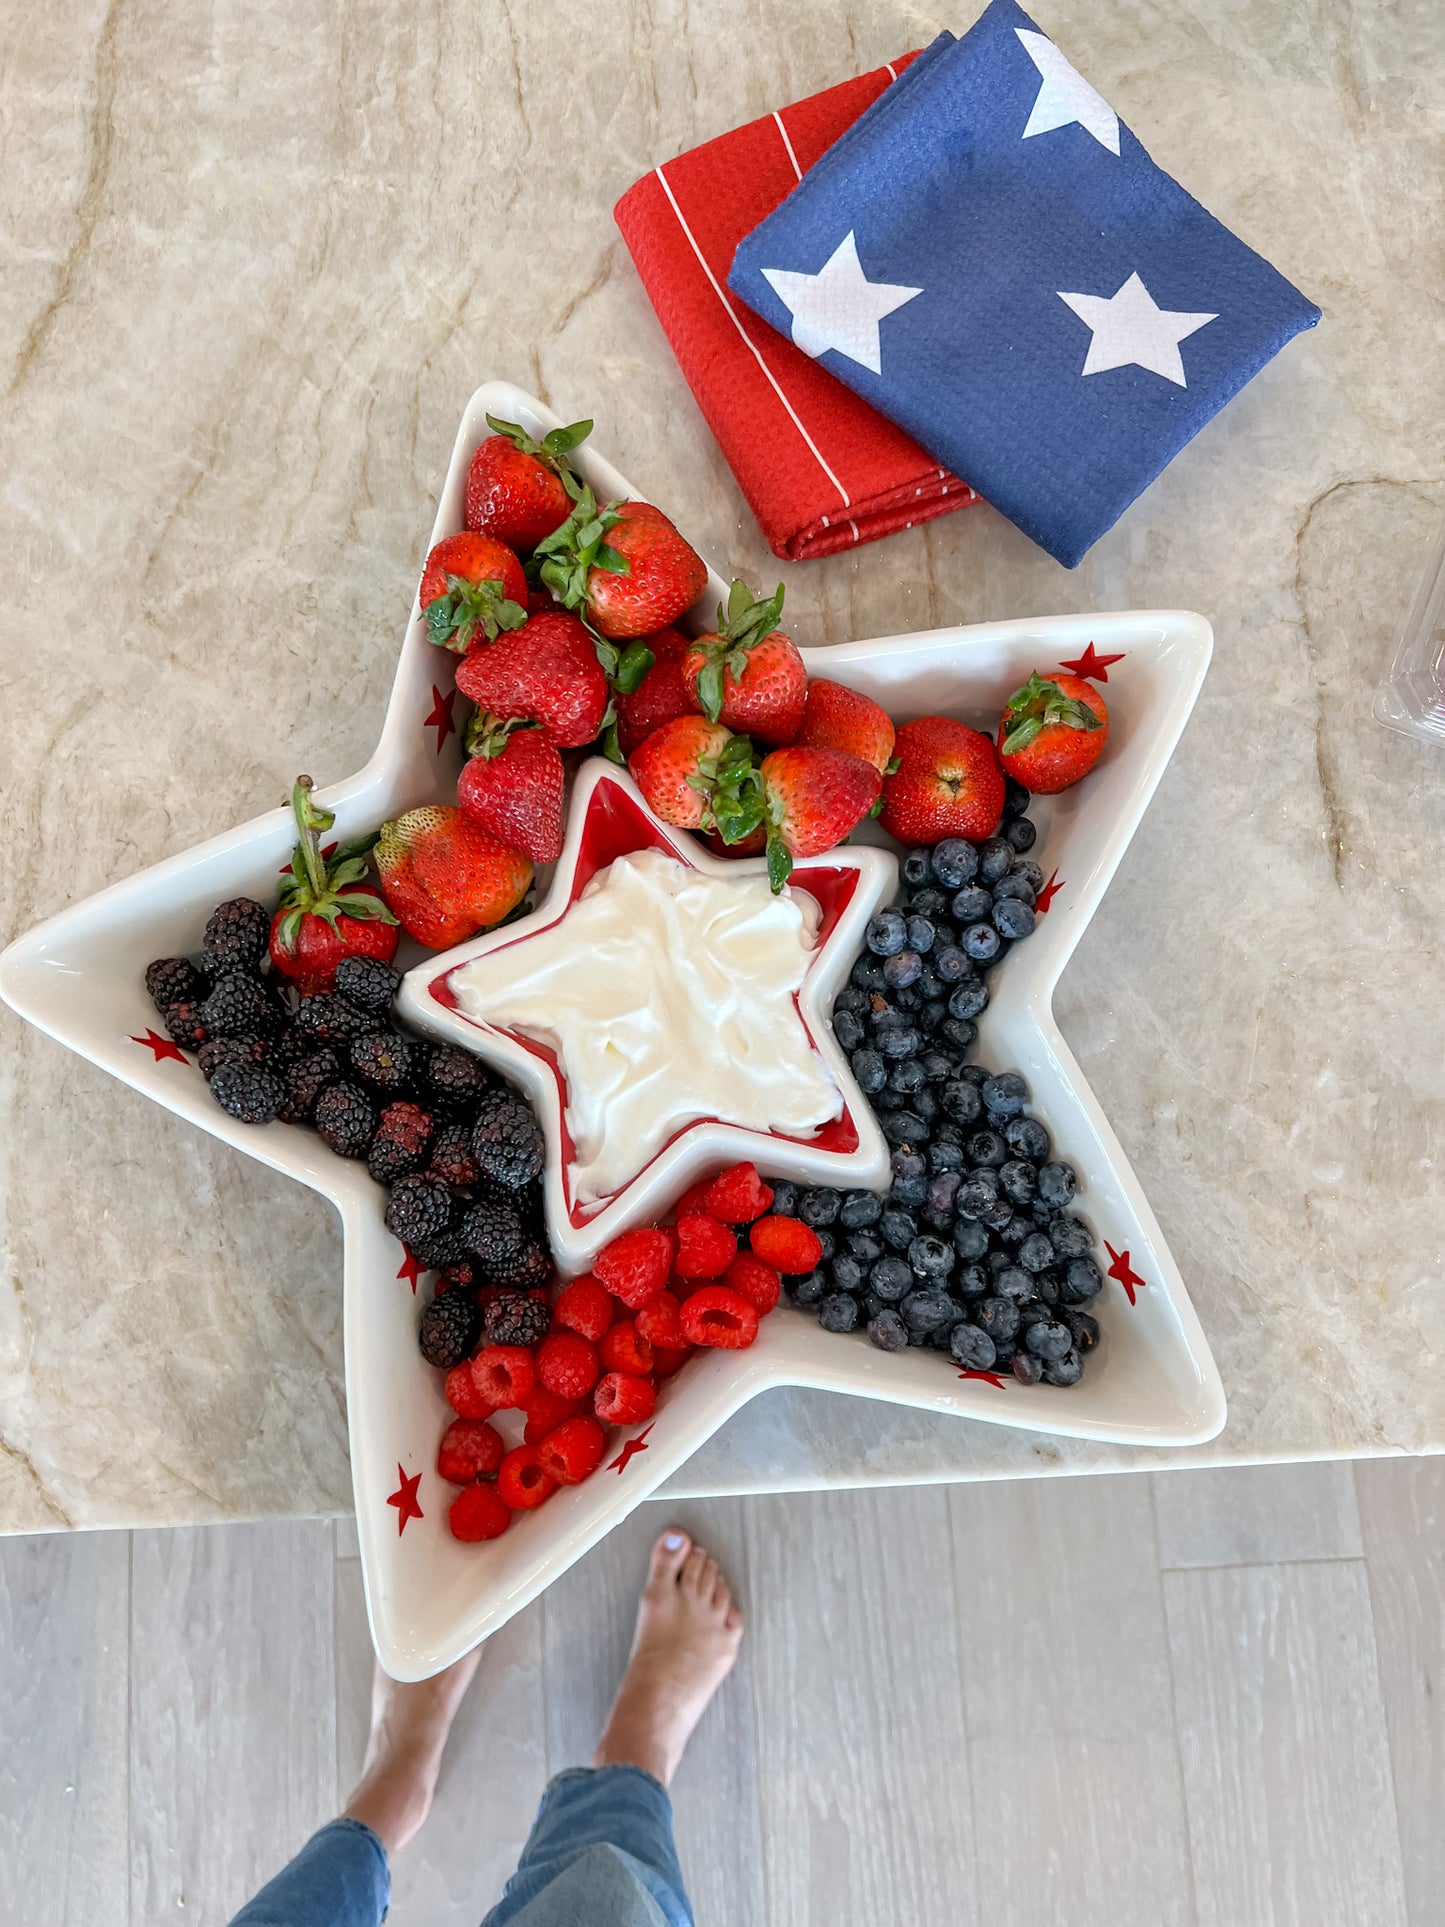 A White star plate with a fruit dessert and our patriotic towel folded on the side.